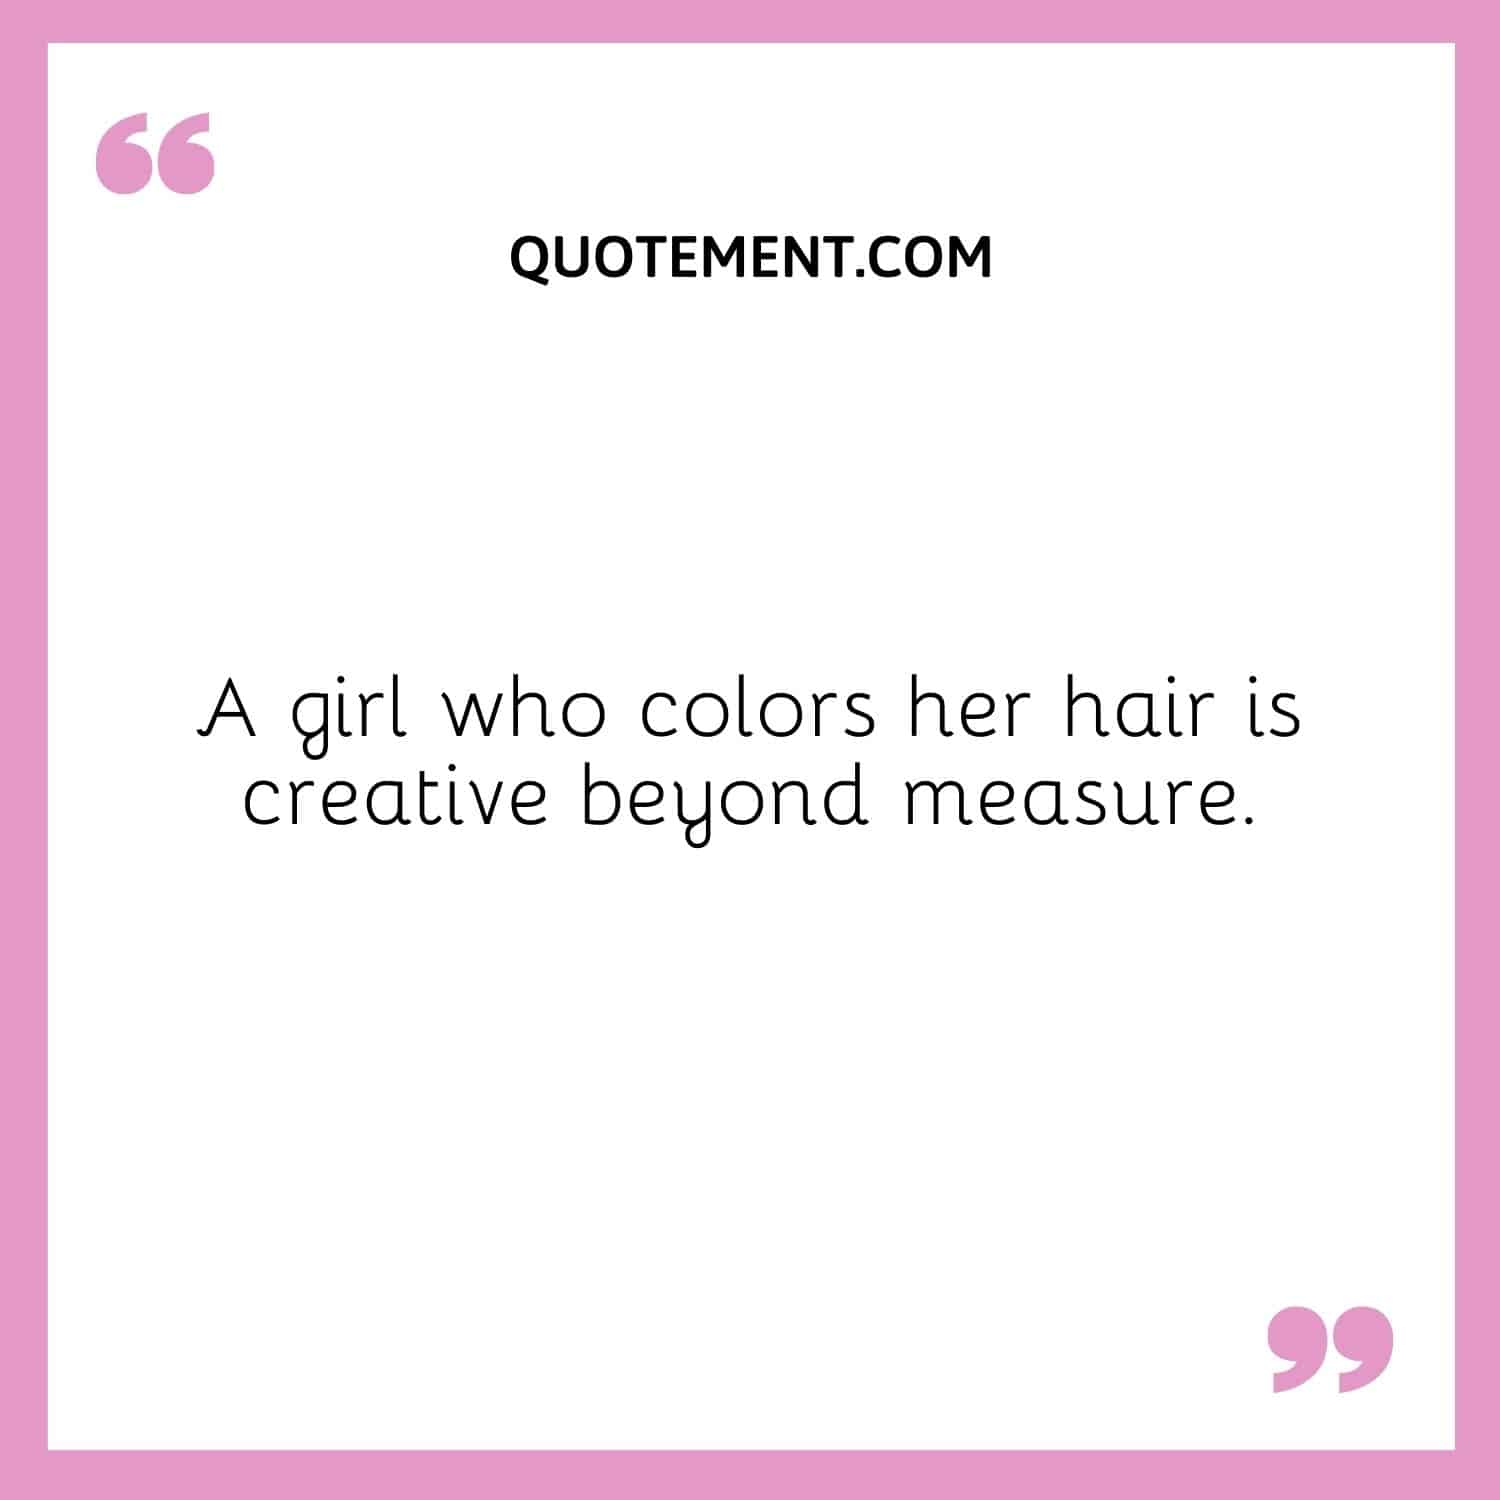 A girl who colors her hair is creative beyond measure